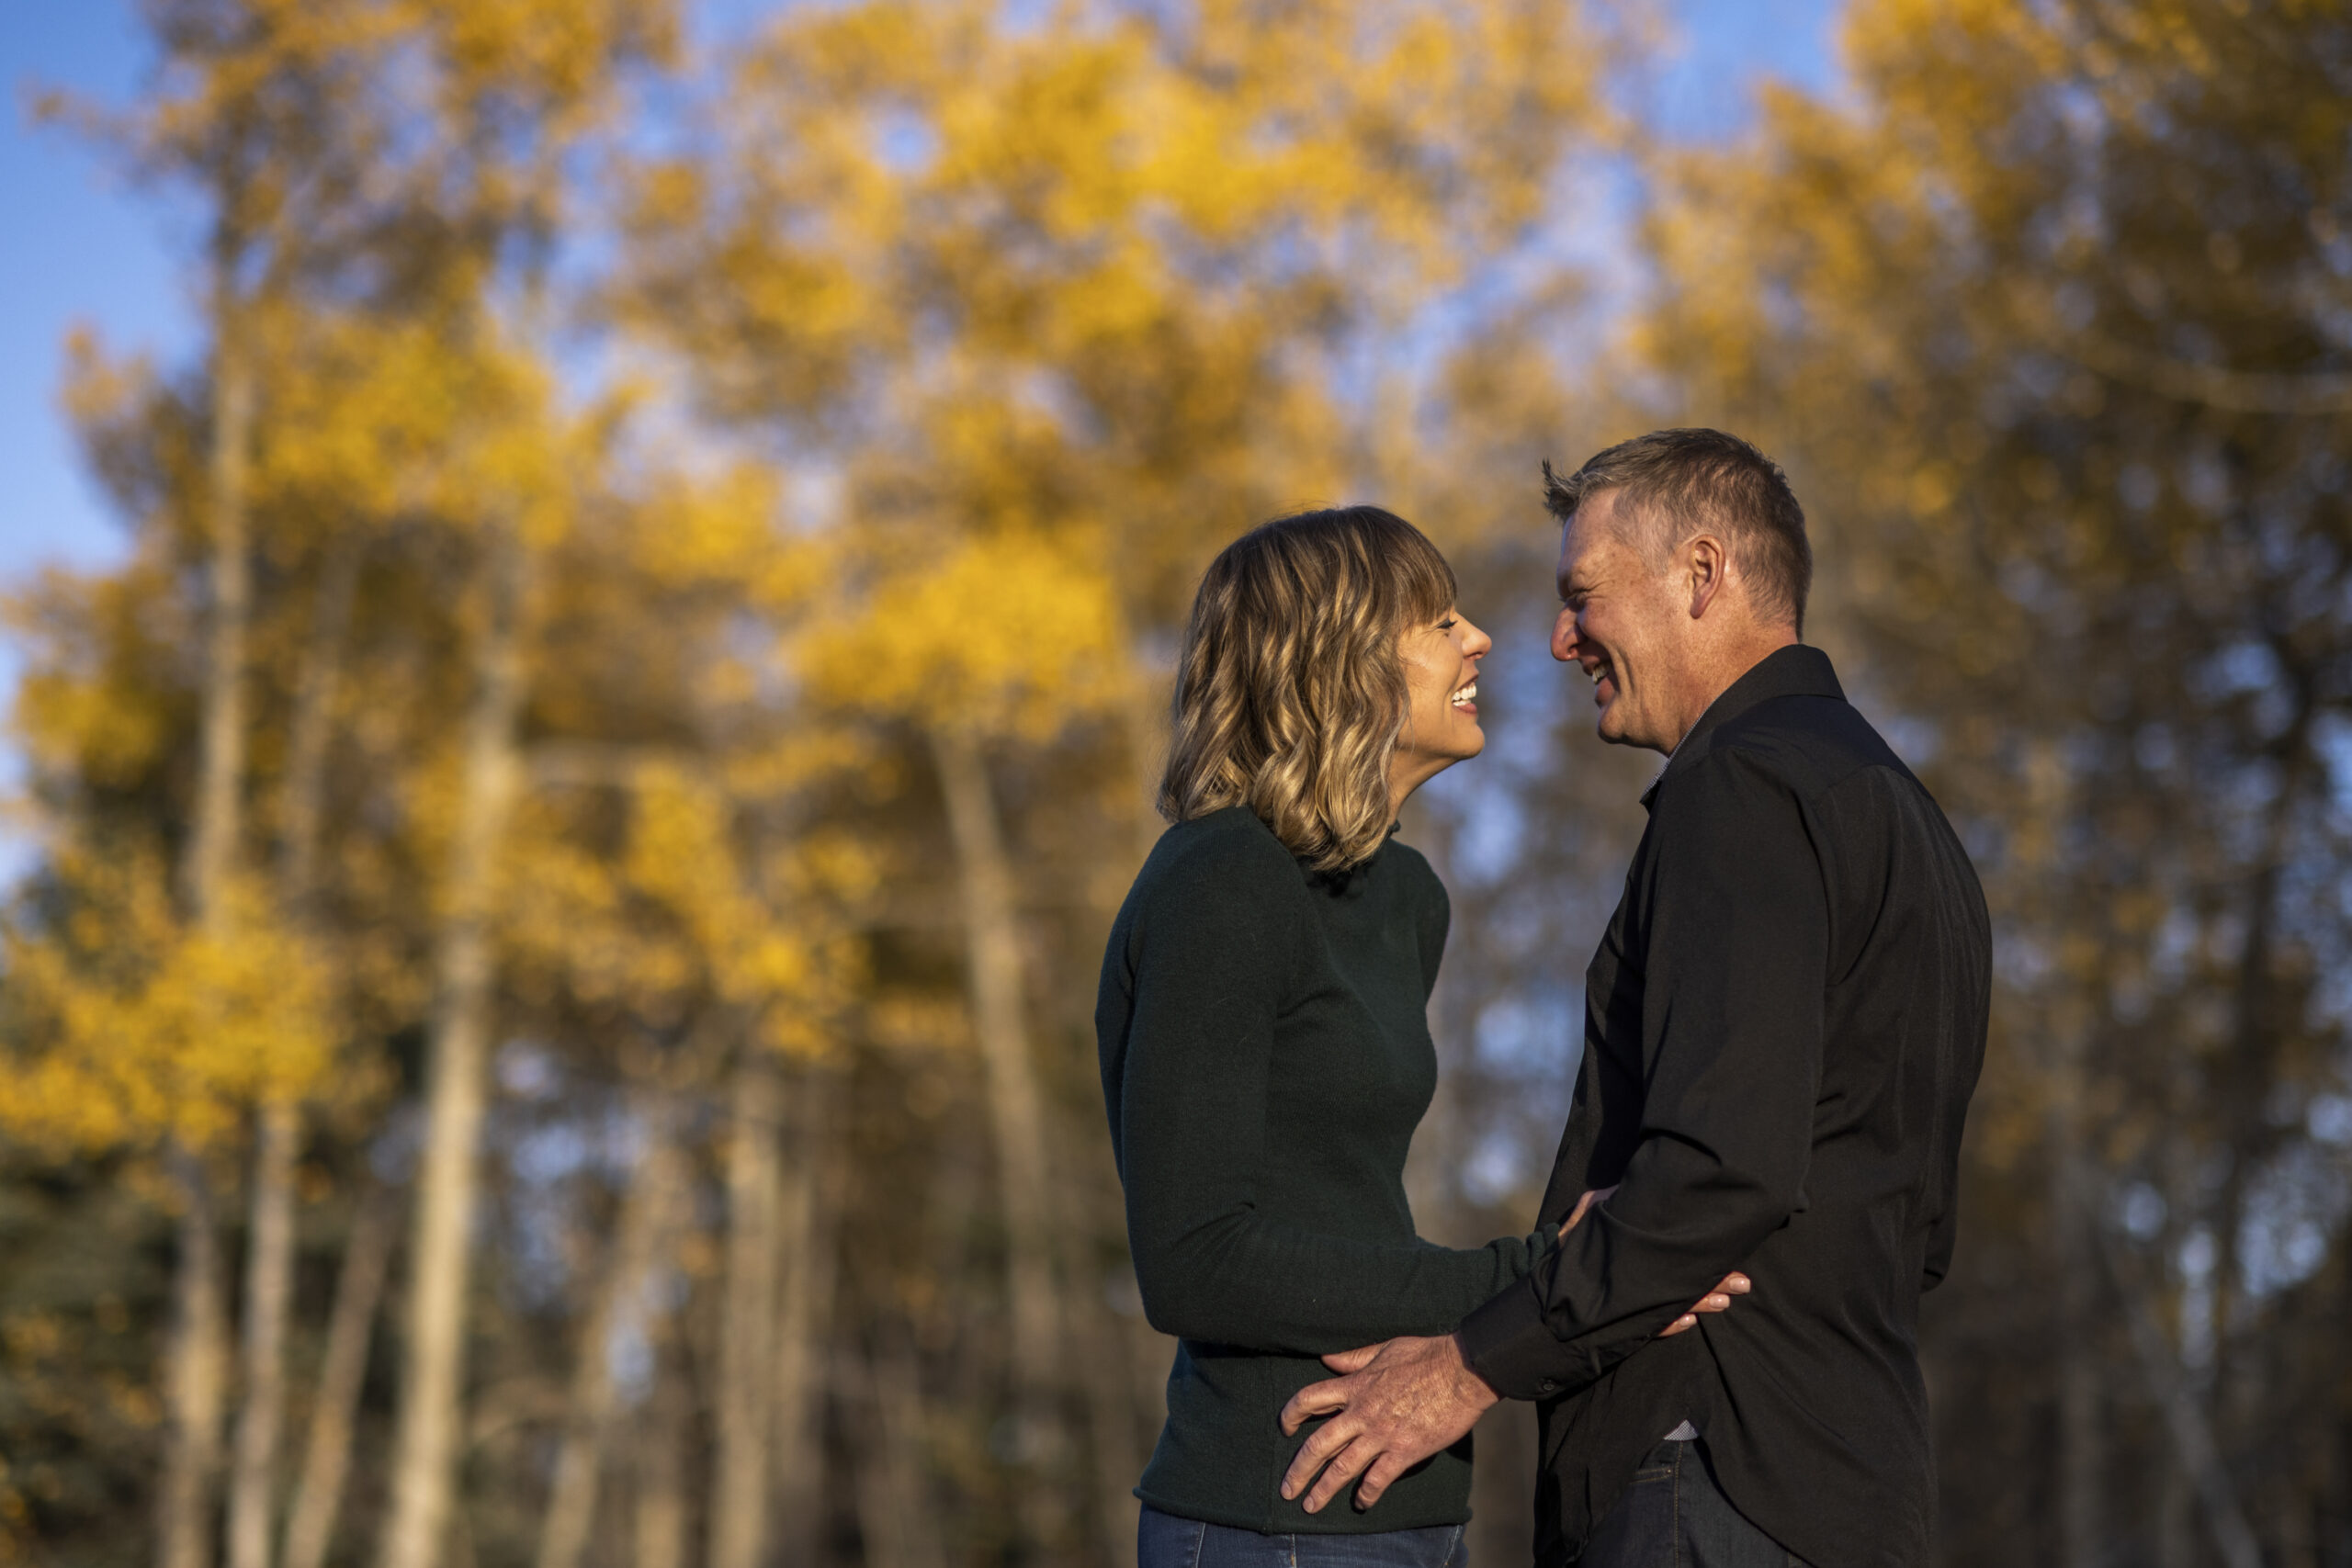 A woman in a green shirt smiles facing a man in a black shirt during an engagement session at Meyer Ranch Park in Colorado.